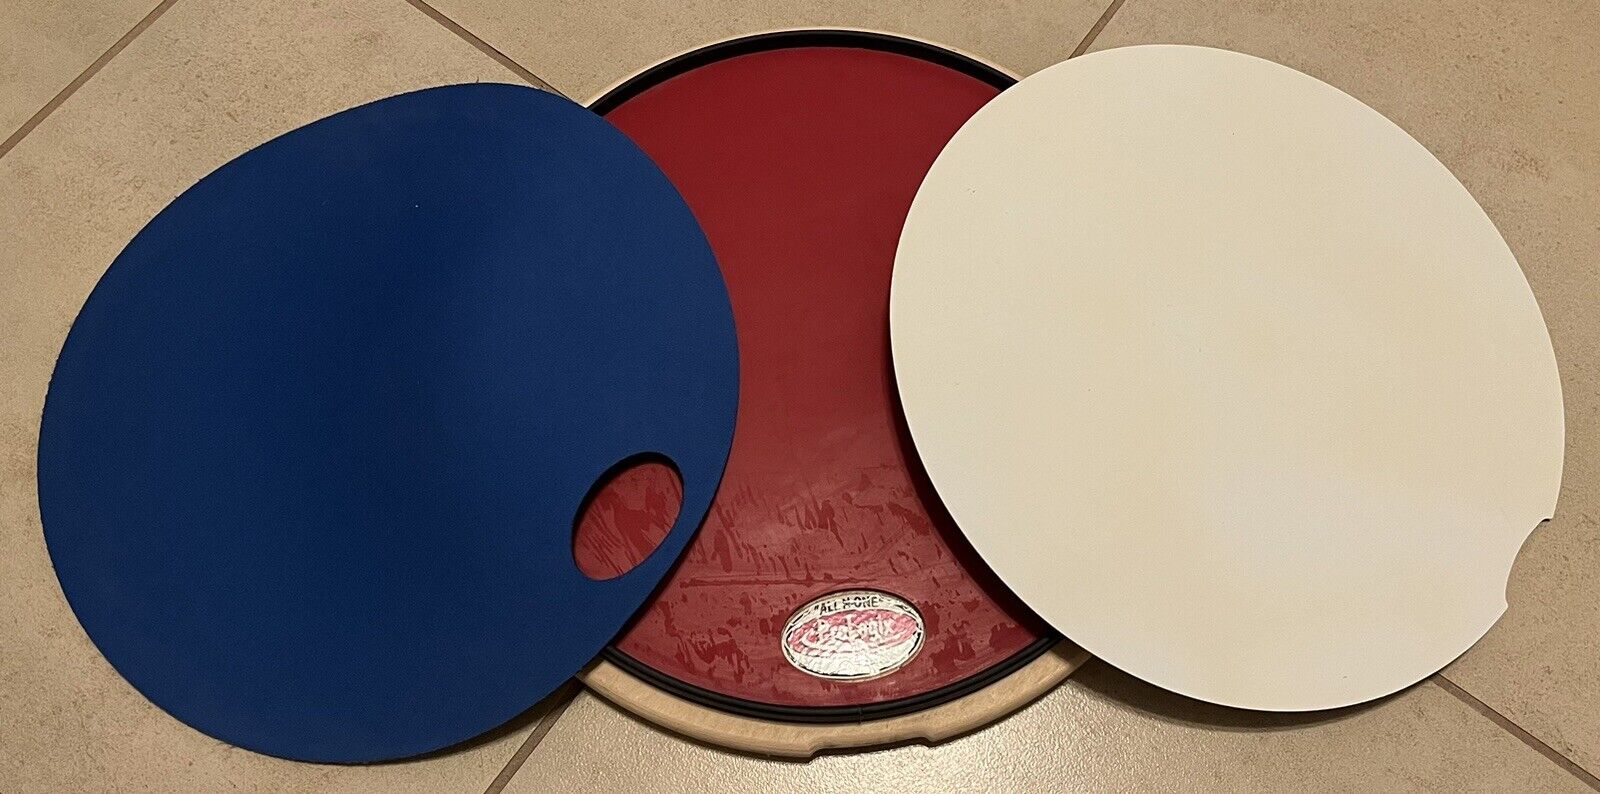 ProLogix 14” All-In-One 3 Surface Practice Pad “Russ Miller Signature”